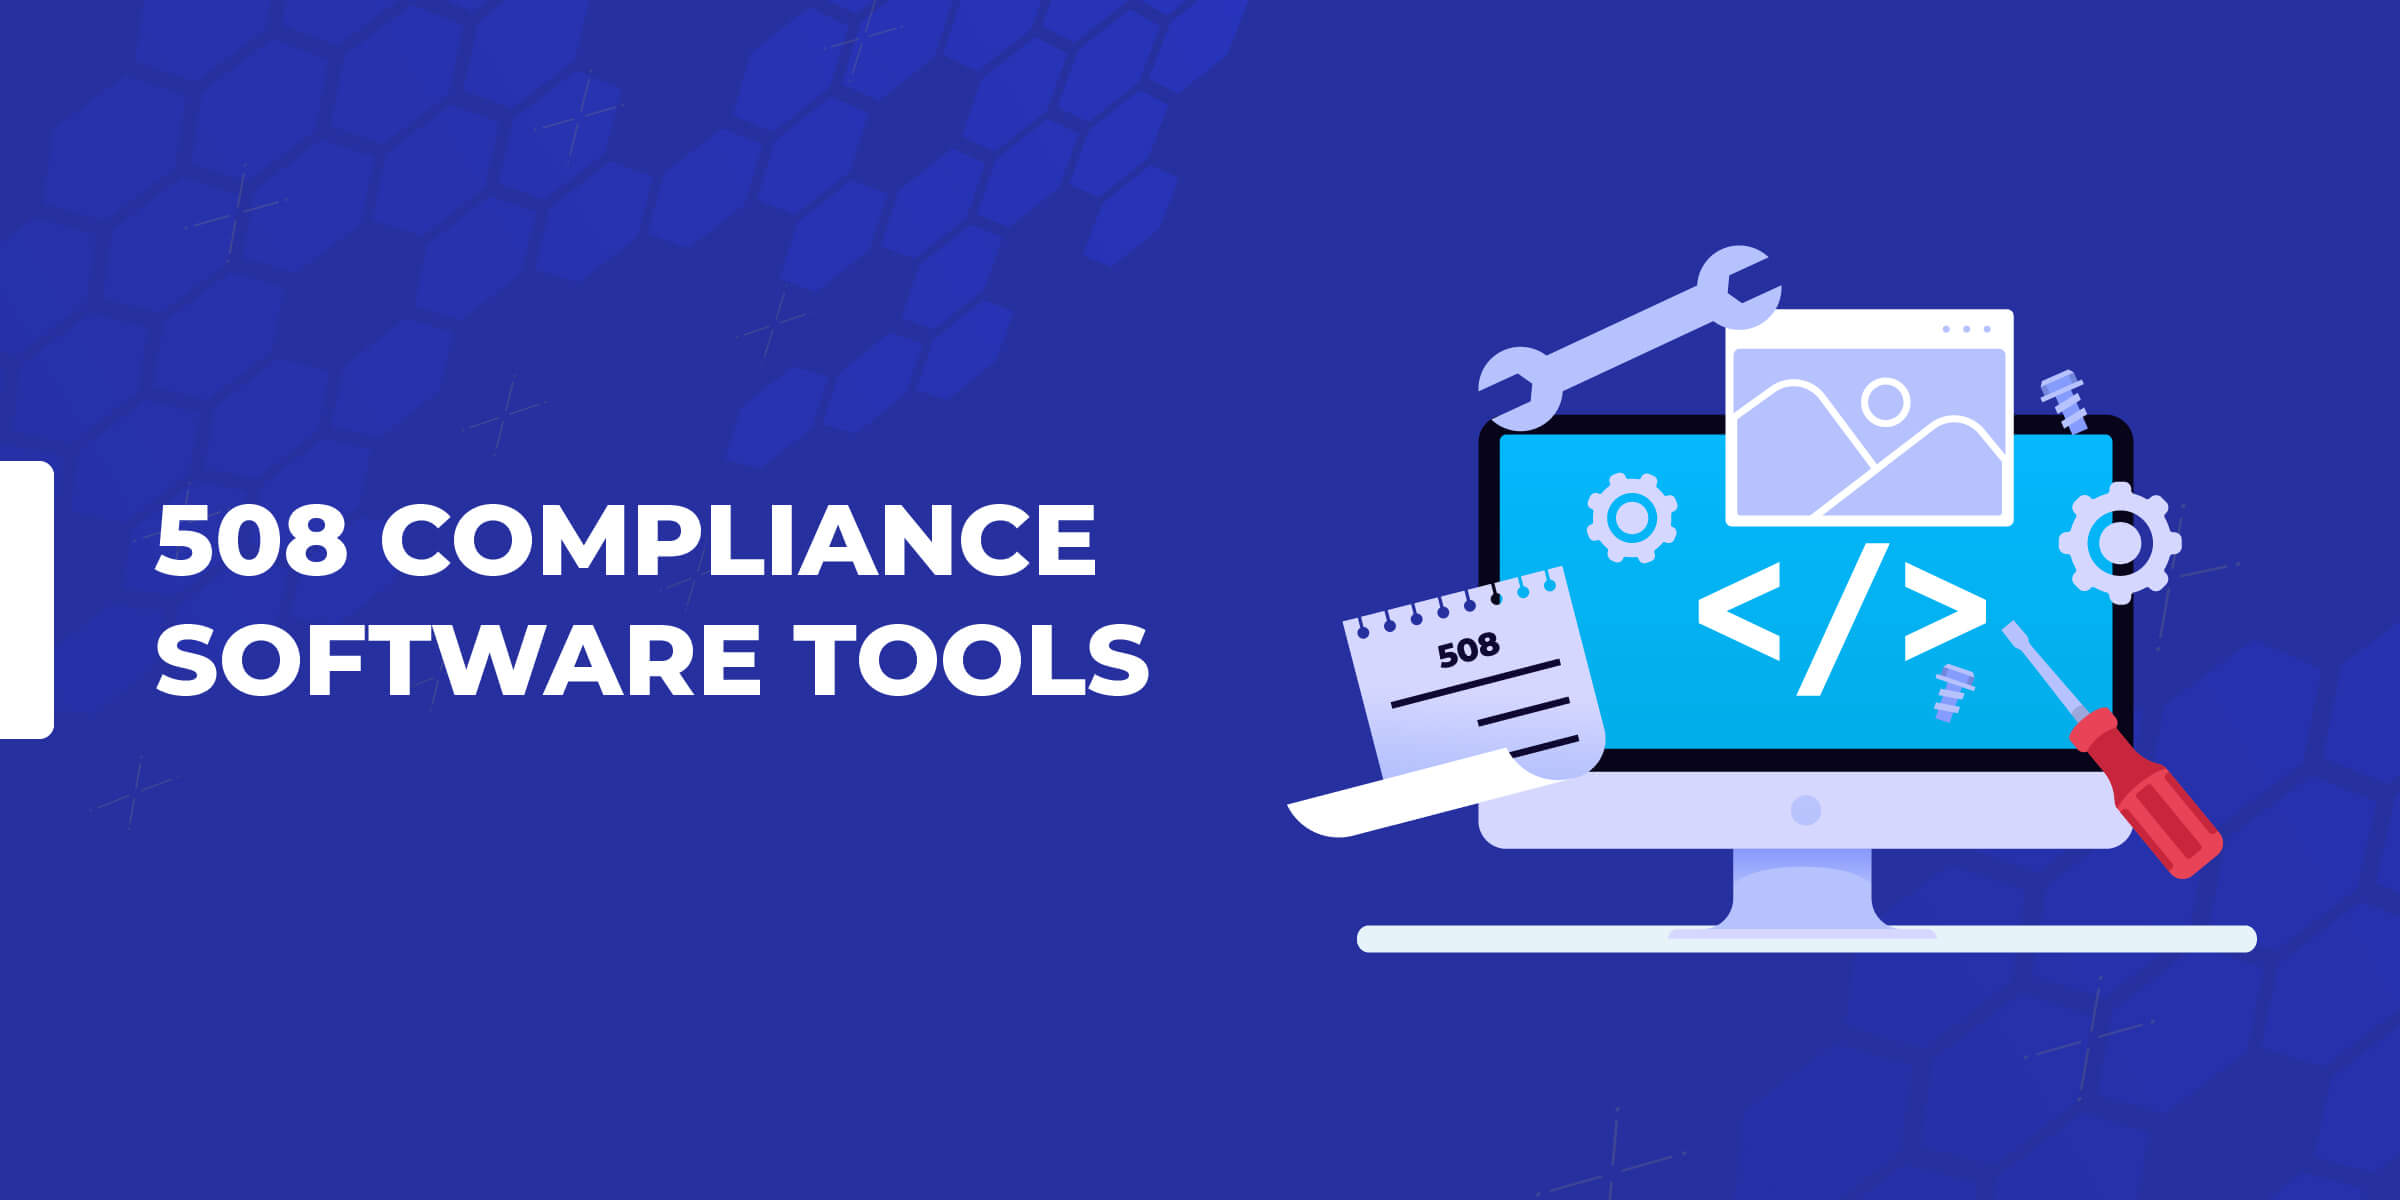 508 Compliance Software Tools